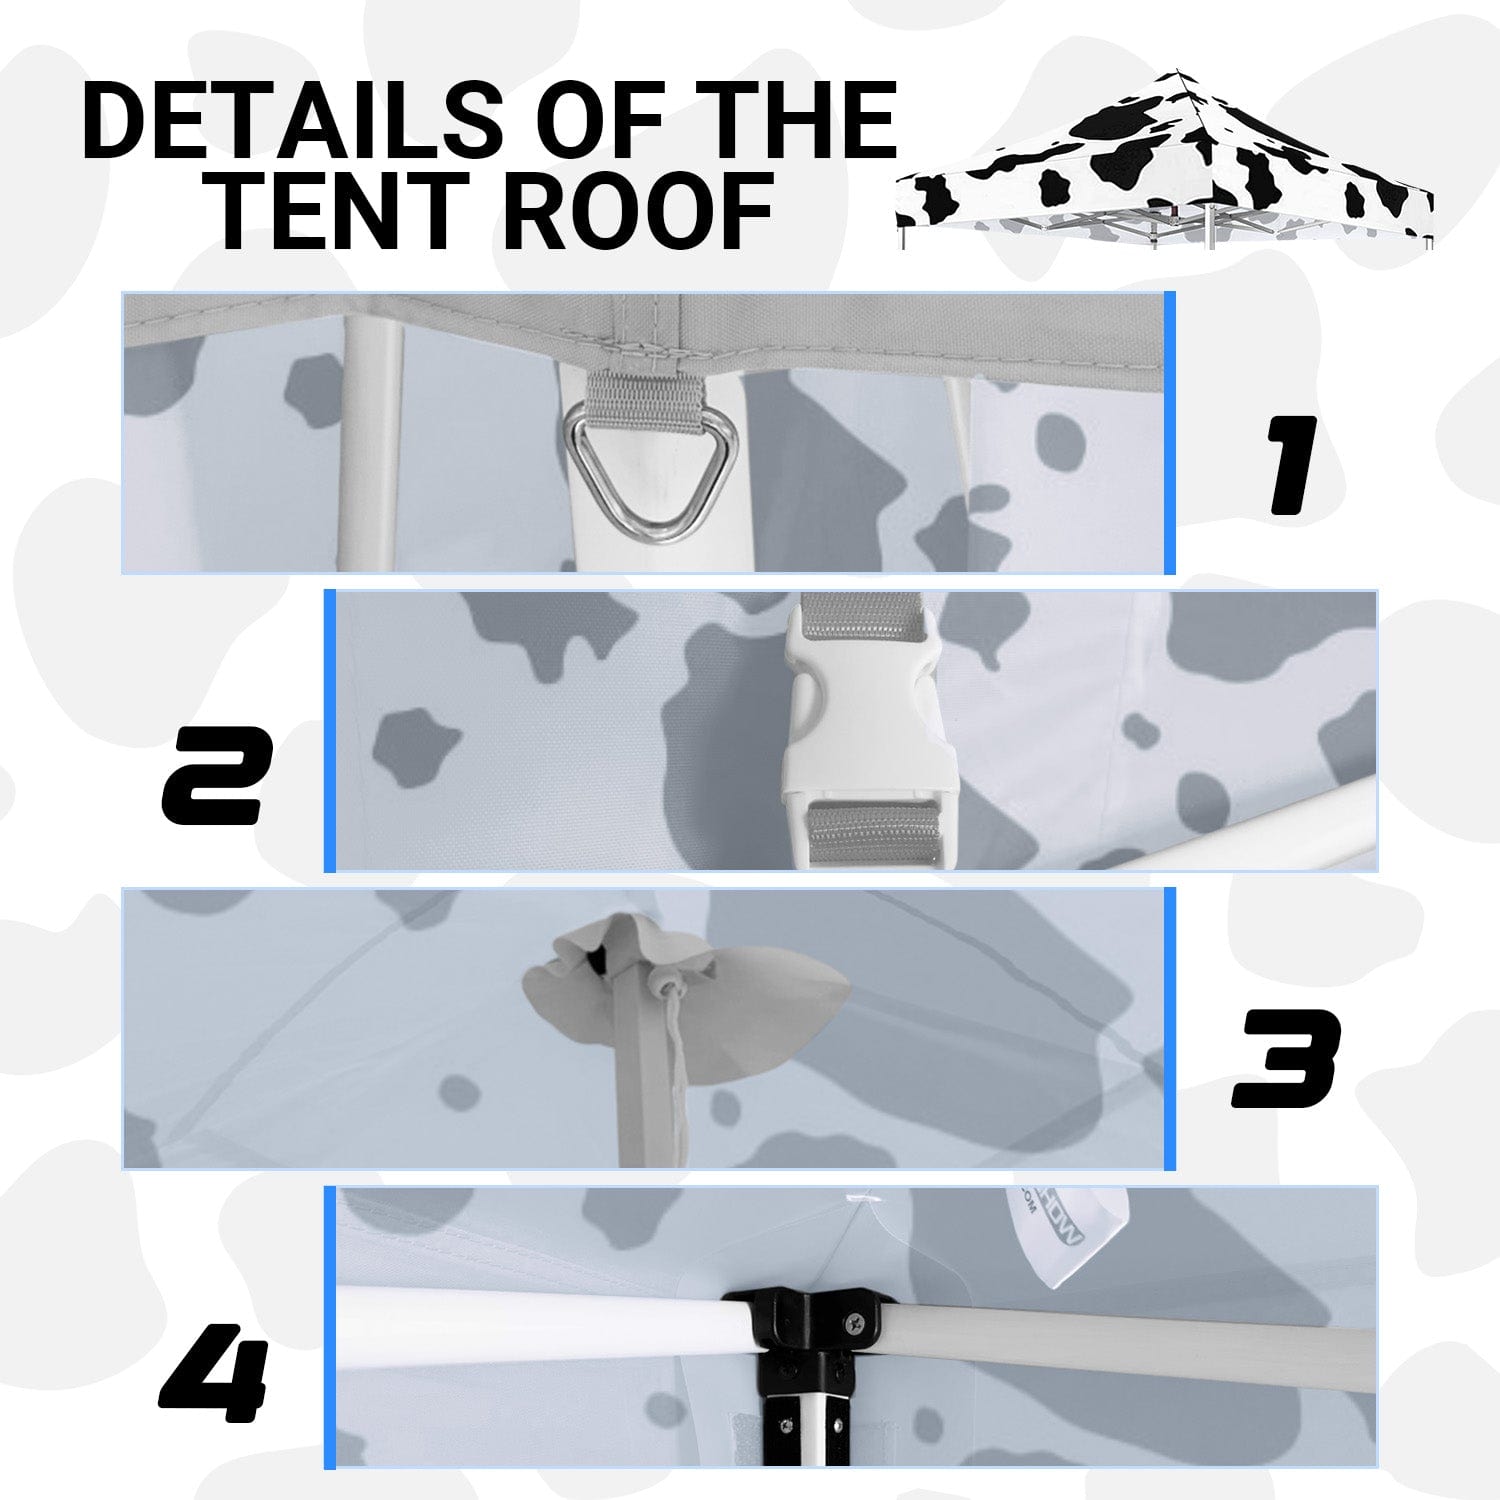 Season Limited | Pop Up Color Canopy Tent Roof